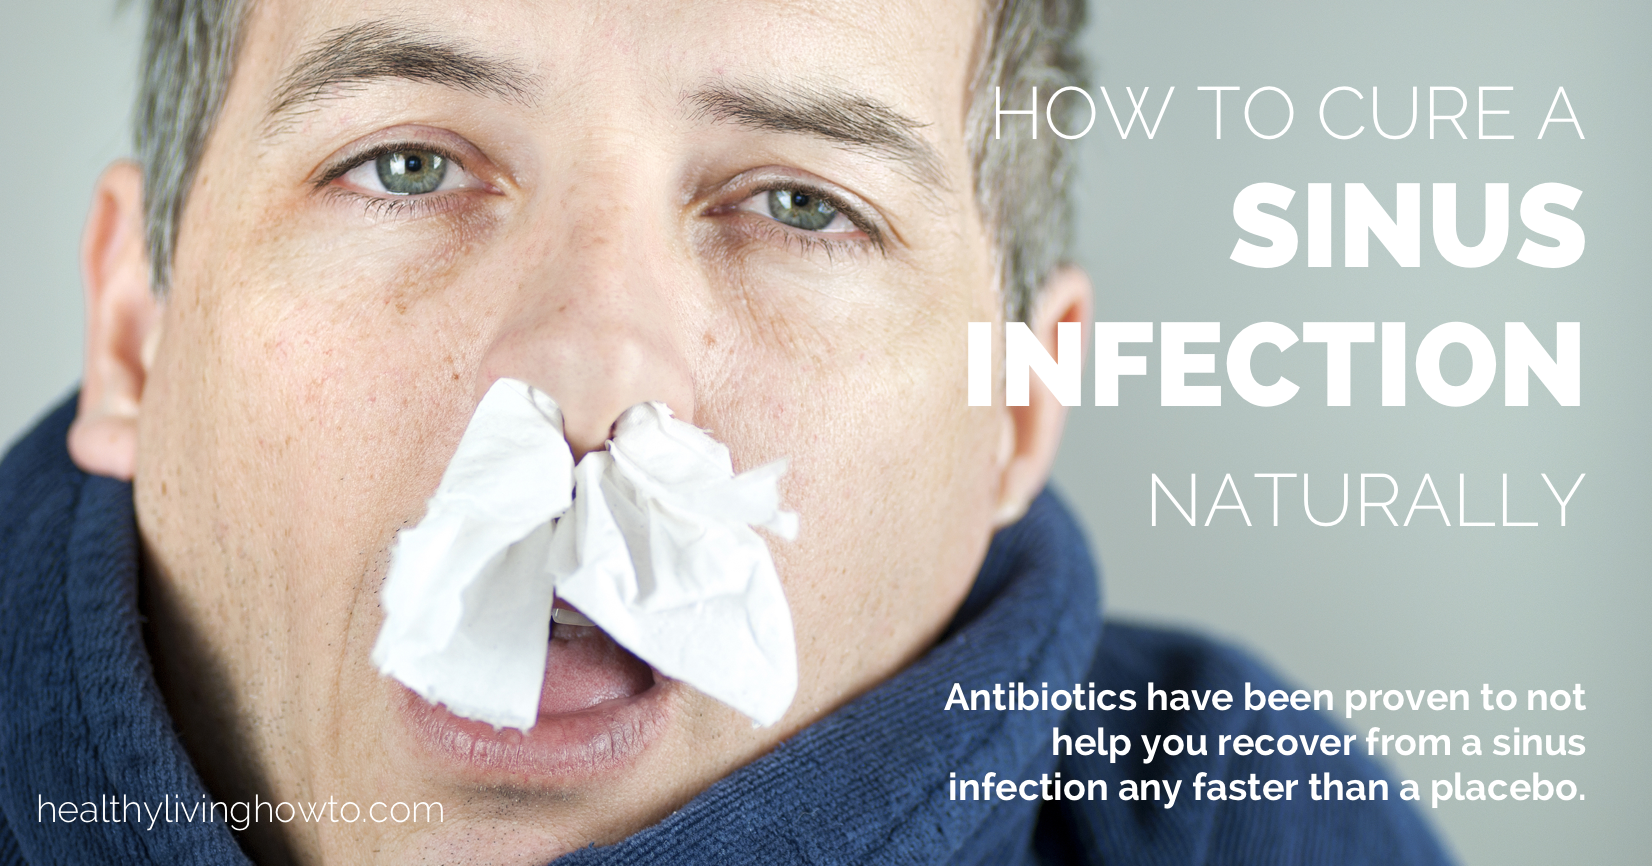 Healing and Healthy Eating: How To Cure A Sinus Infection Naturally